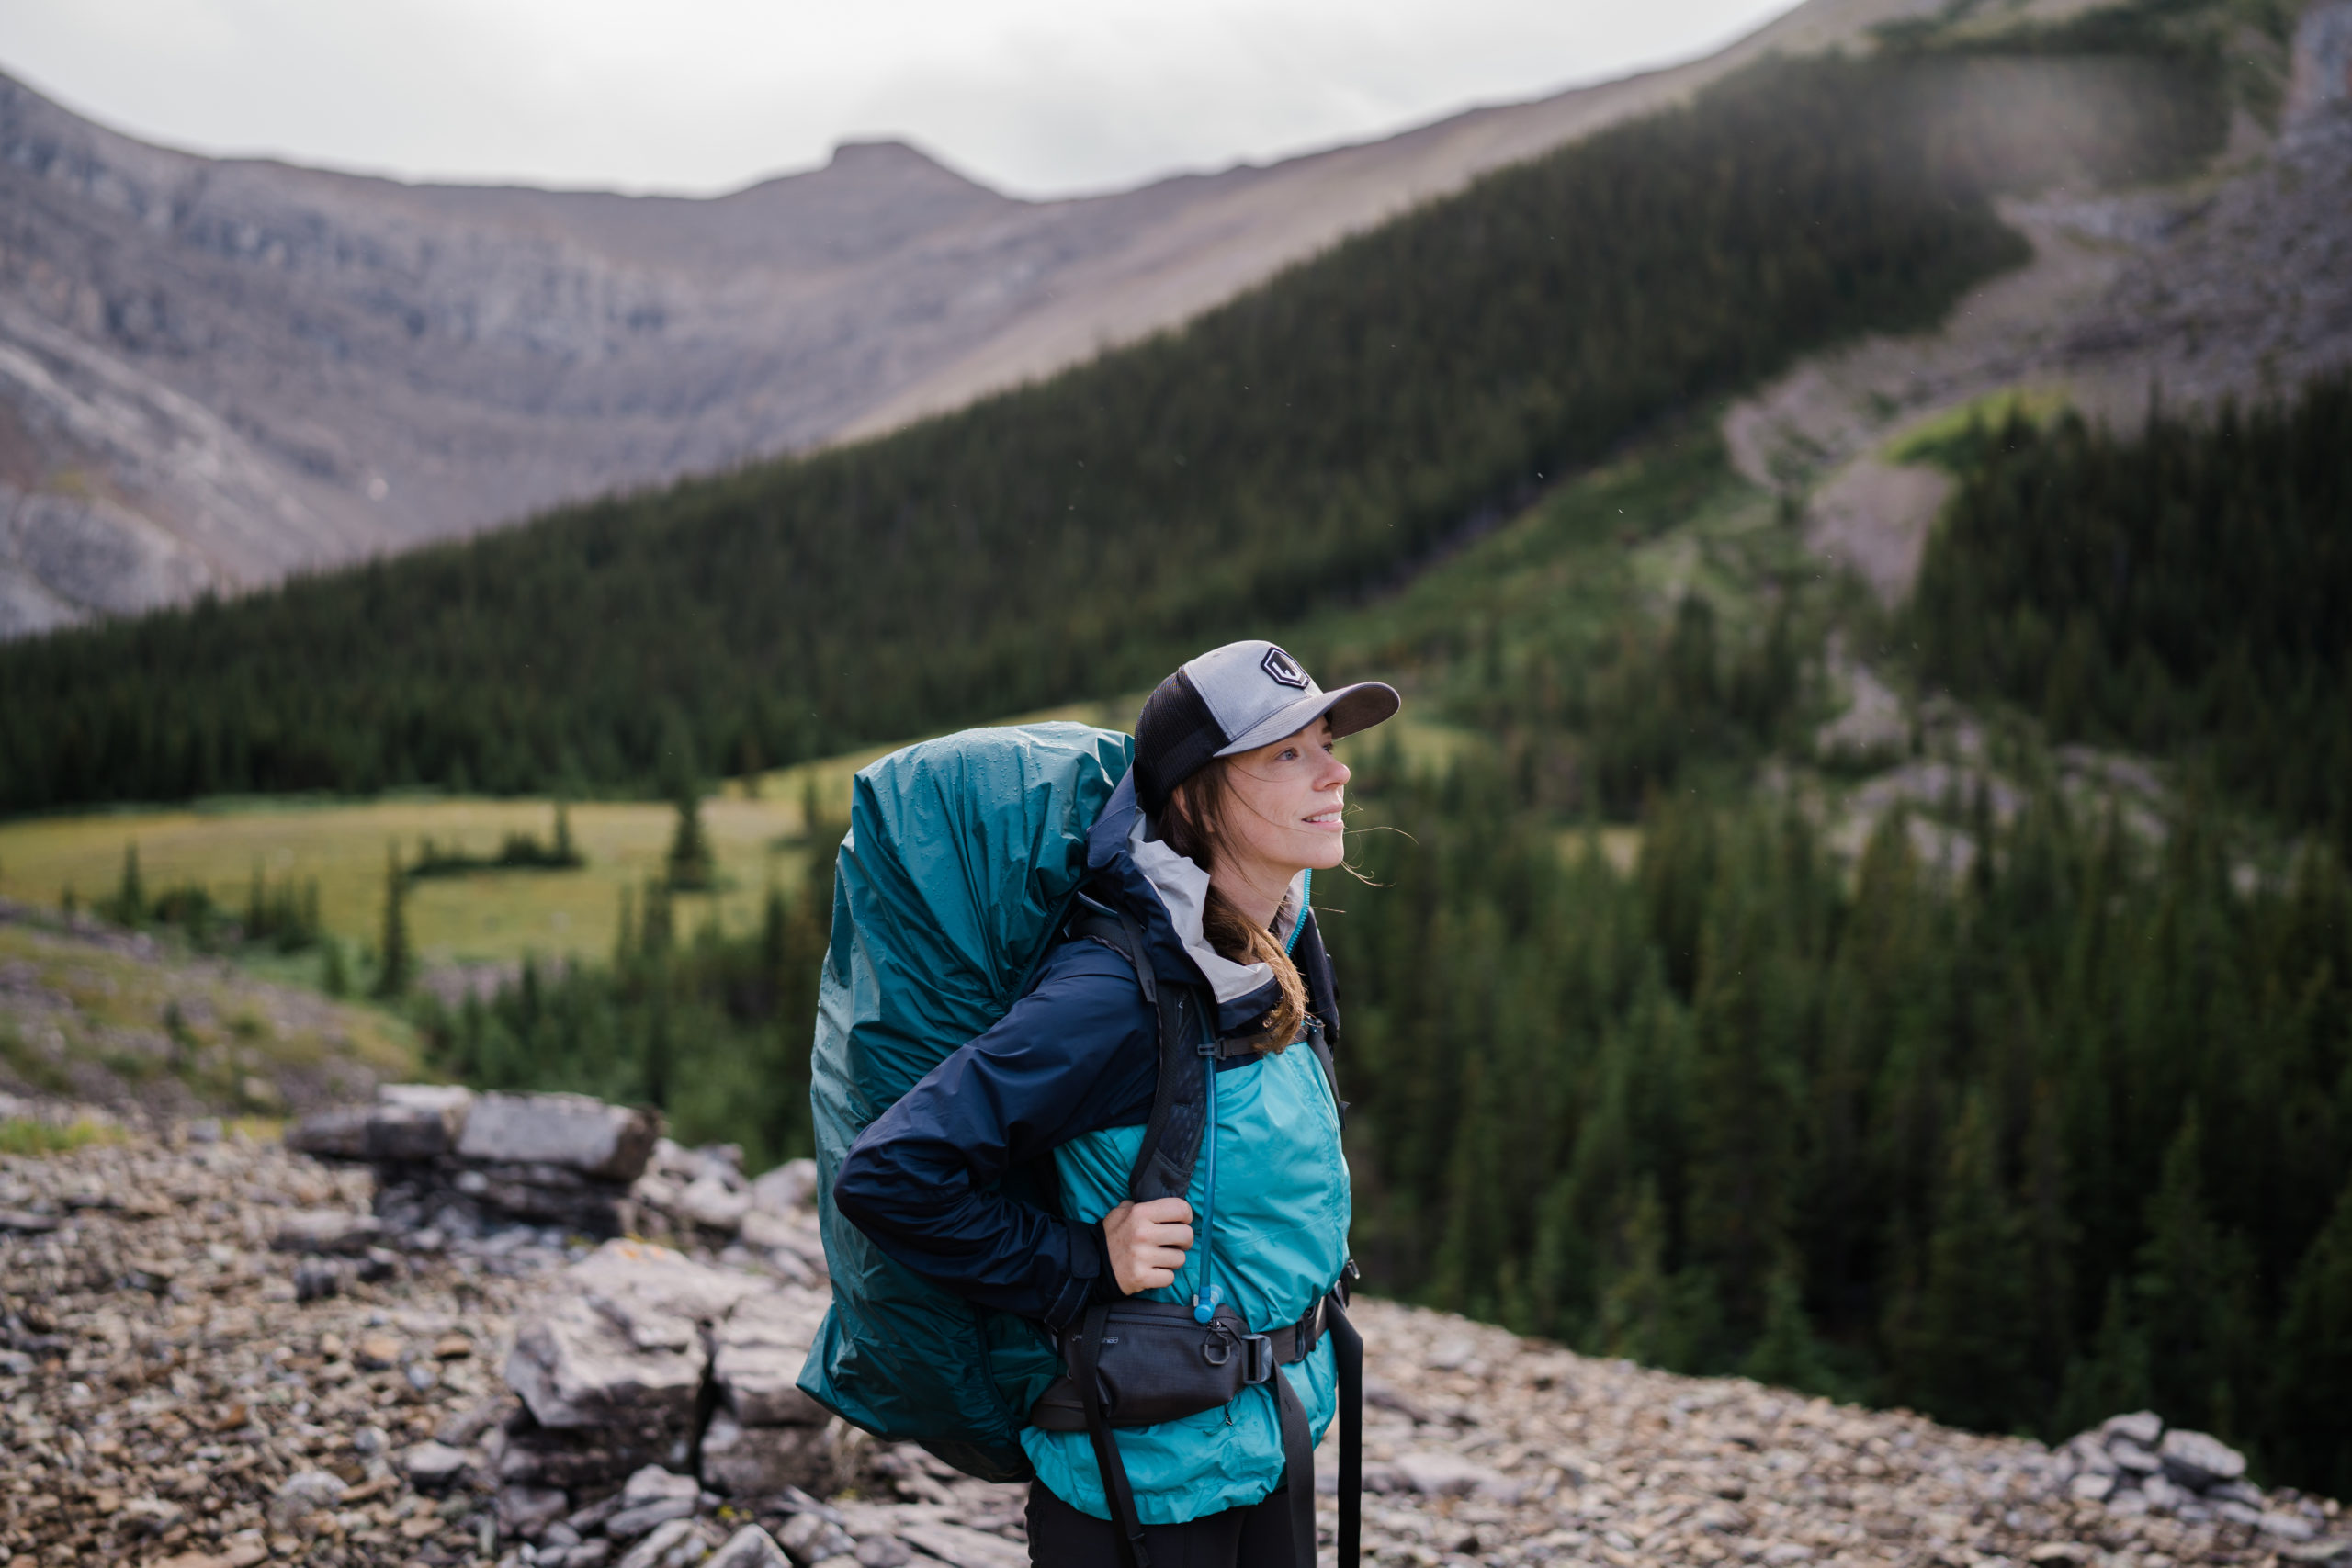 alberta elopement photographer wearing a grey hat and a blue jacket looks off into the distance as the sun sets on the mountain behind her while on a backpacking trip